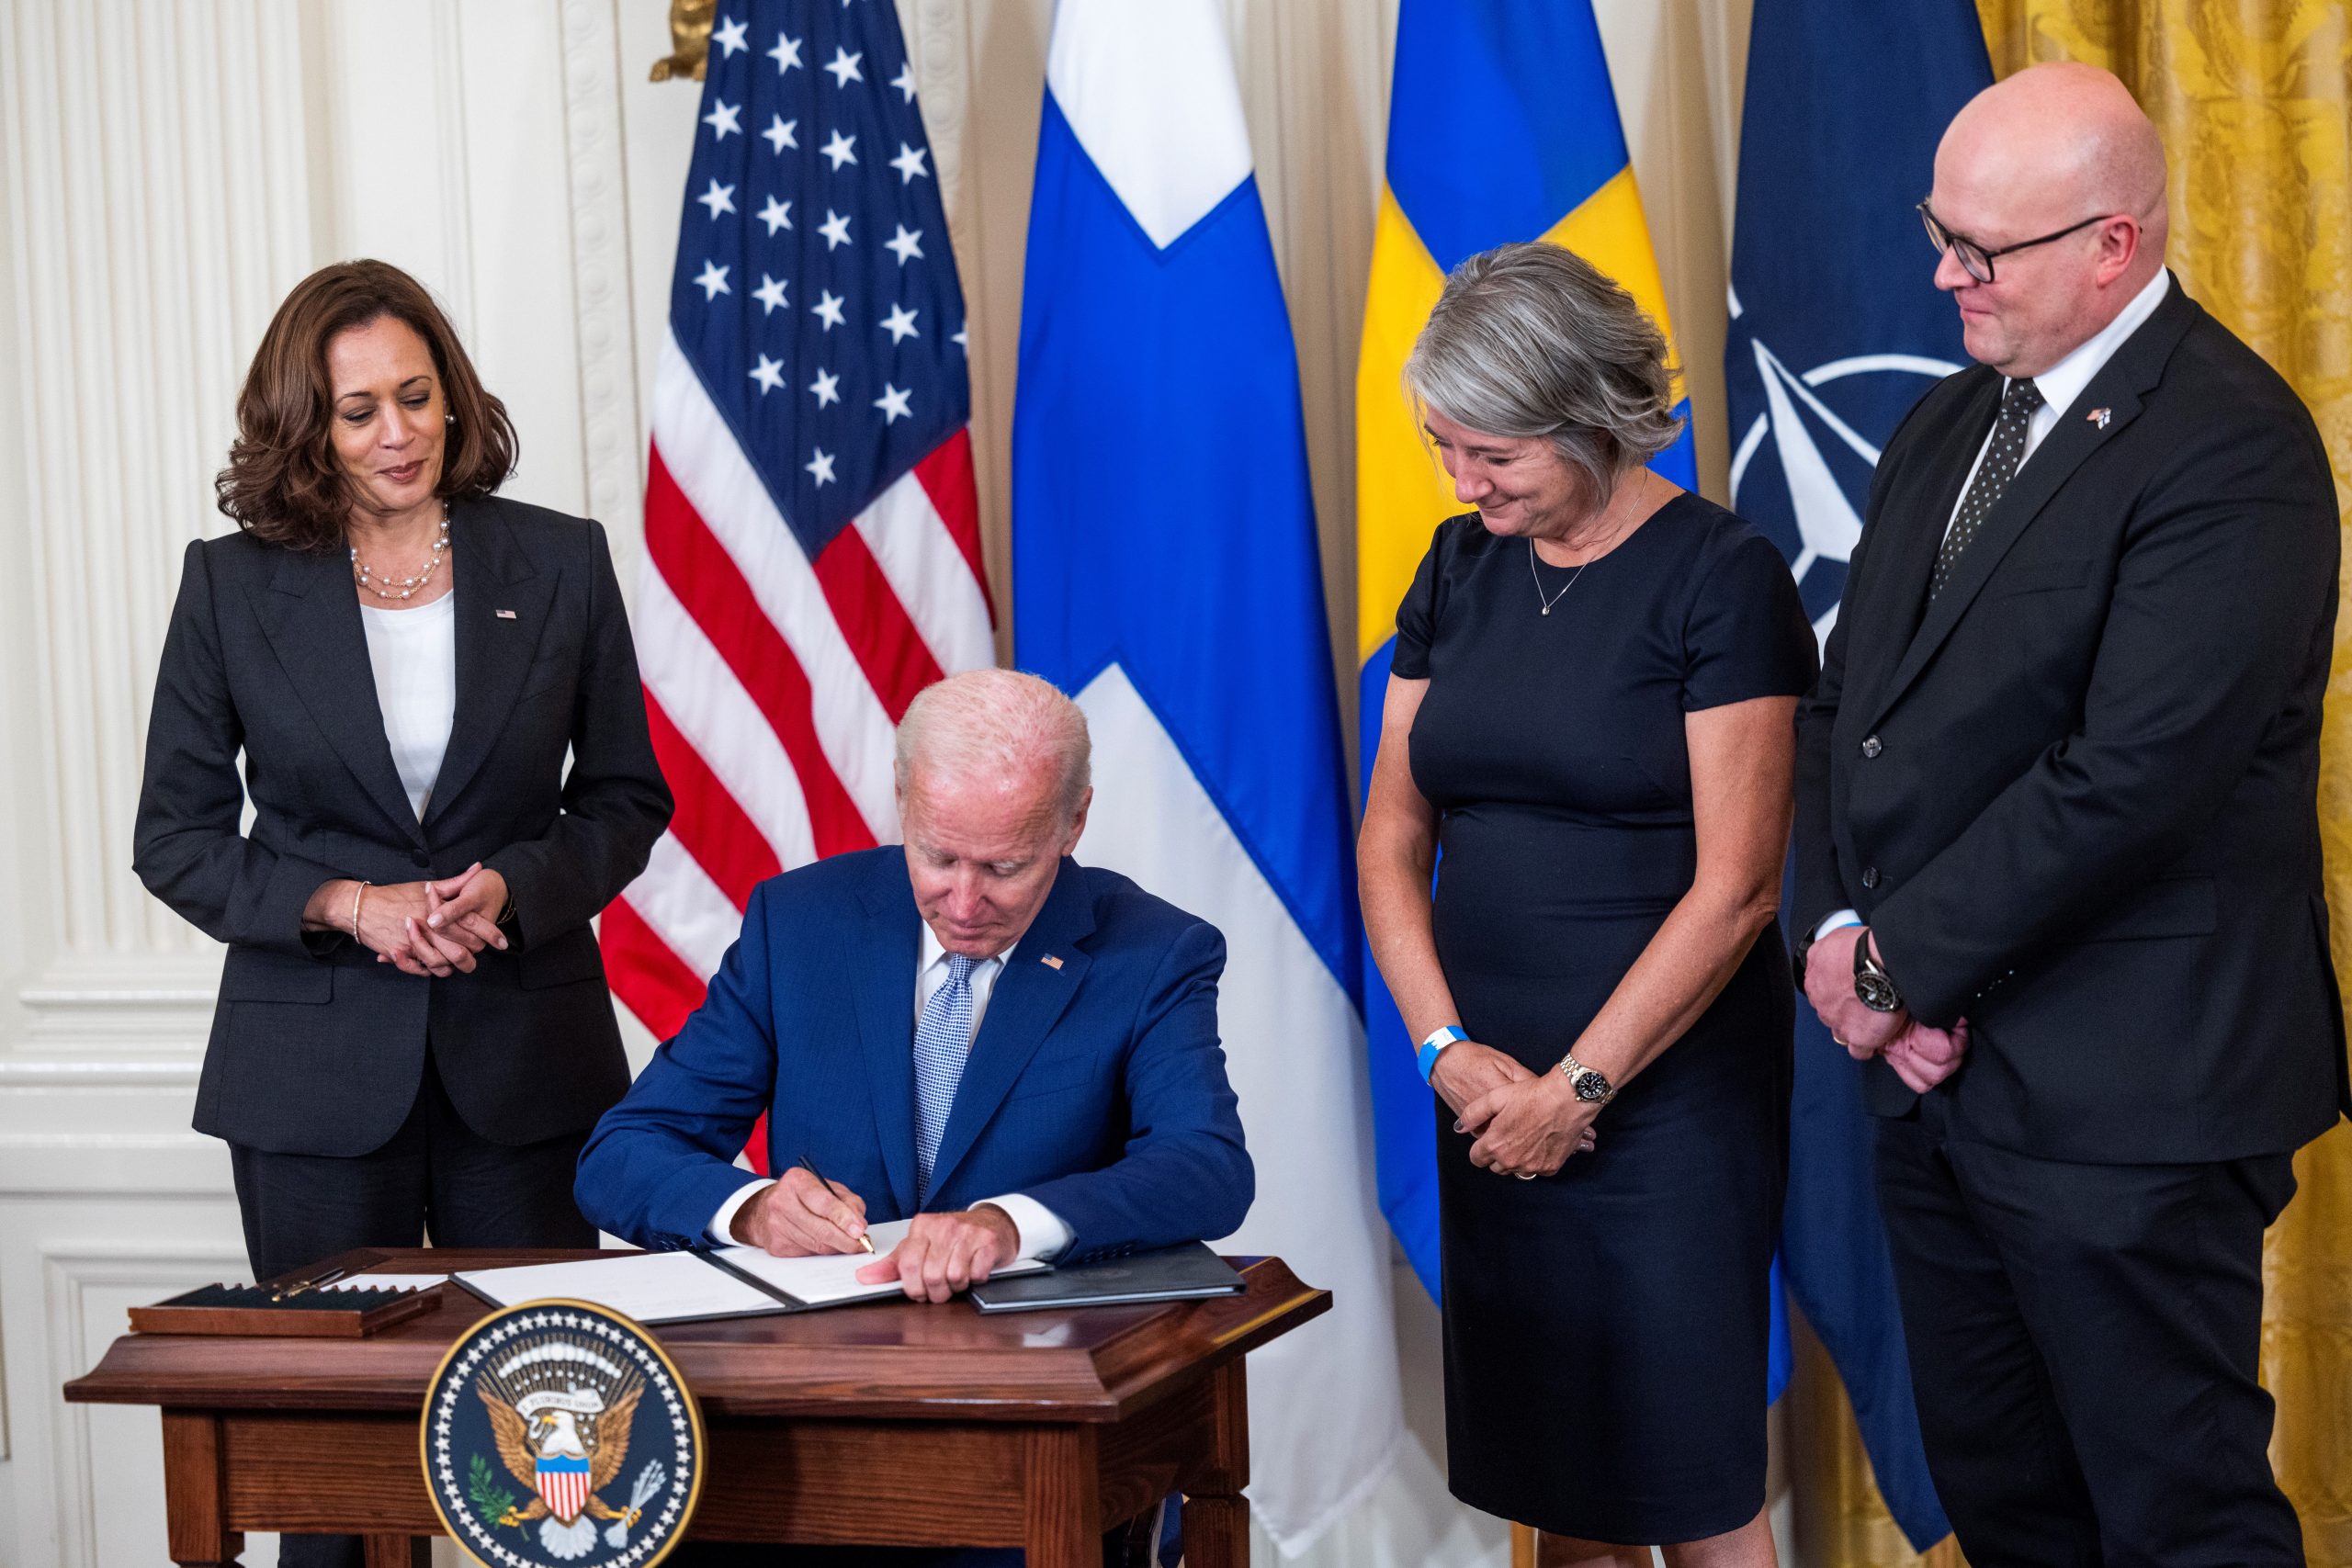 epa10113031 US President Joe Biden (C-L), alongside Vice President Kamala Harris (L), Swedish Ambassador to the US Karin Ulrika Olofsdotter (C-R), and Finnish Ambassador to the US Mikko Hautala (R), signs the Instruments of Ratification for the Accession Protocols to the North Atlantic Treaty (NATO) for Finland and Sweden in the East Room of the White House in Washington, DC, USA, 09 August 2022. The two Nordic countries are seeking to join NATO following Russia's invasion of Ukraine.  EPA/JIM LO SCALZO